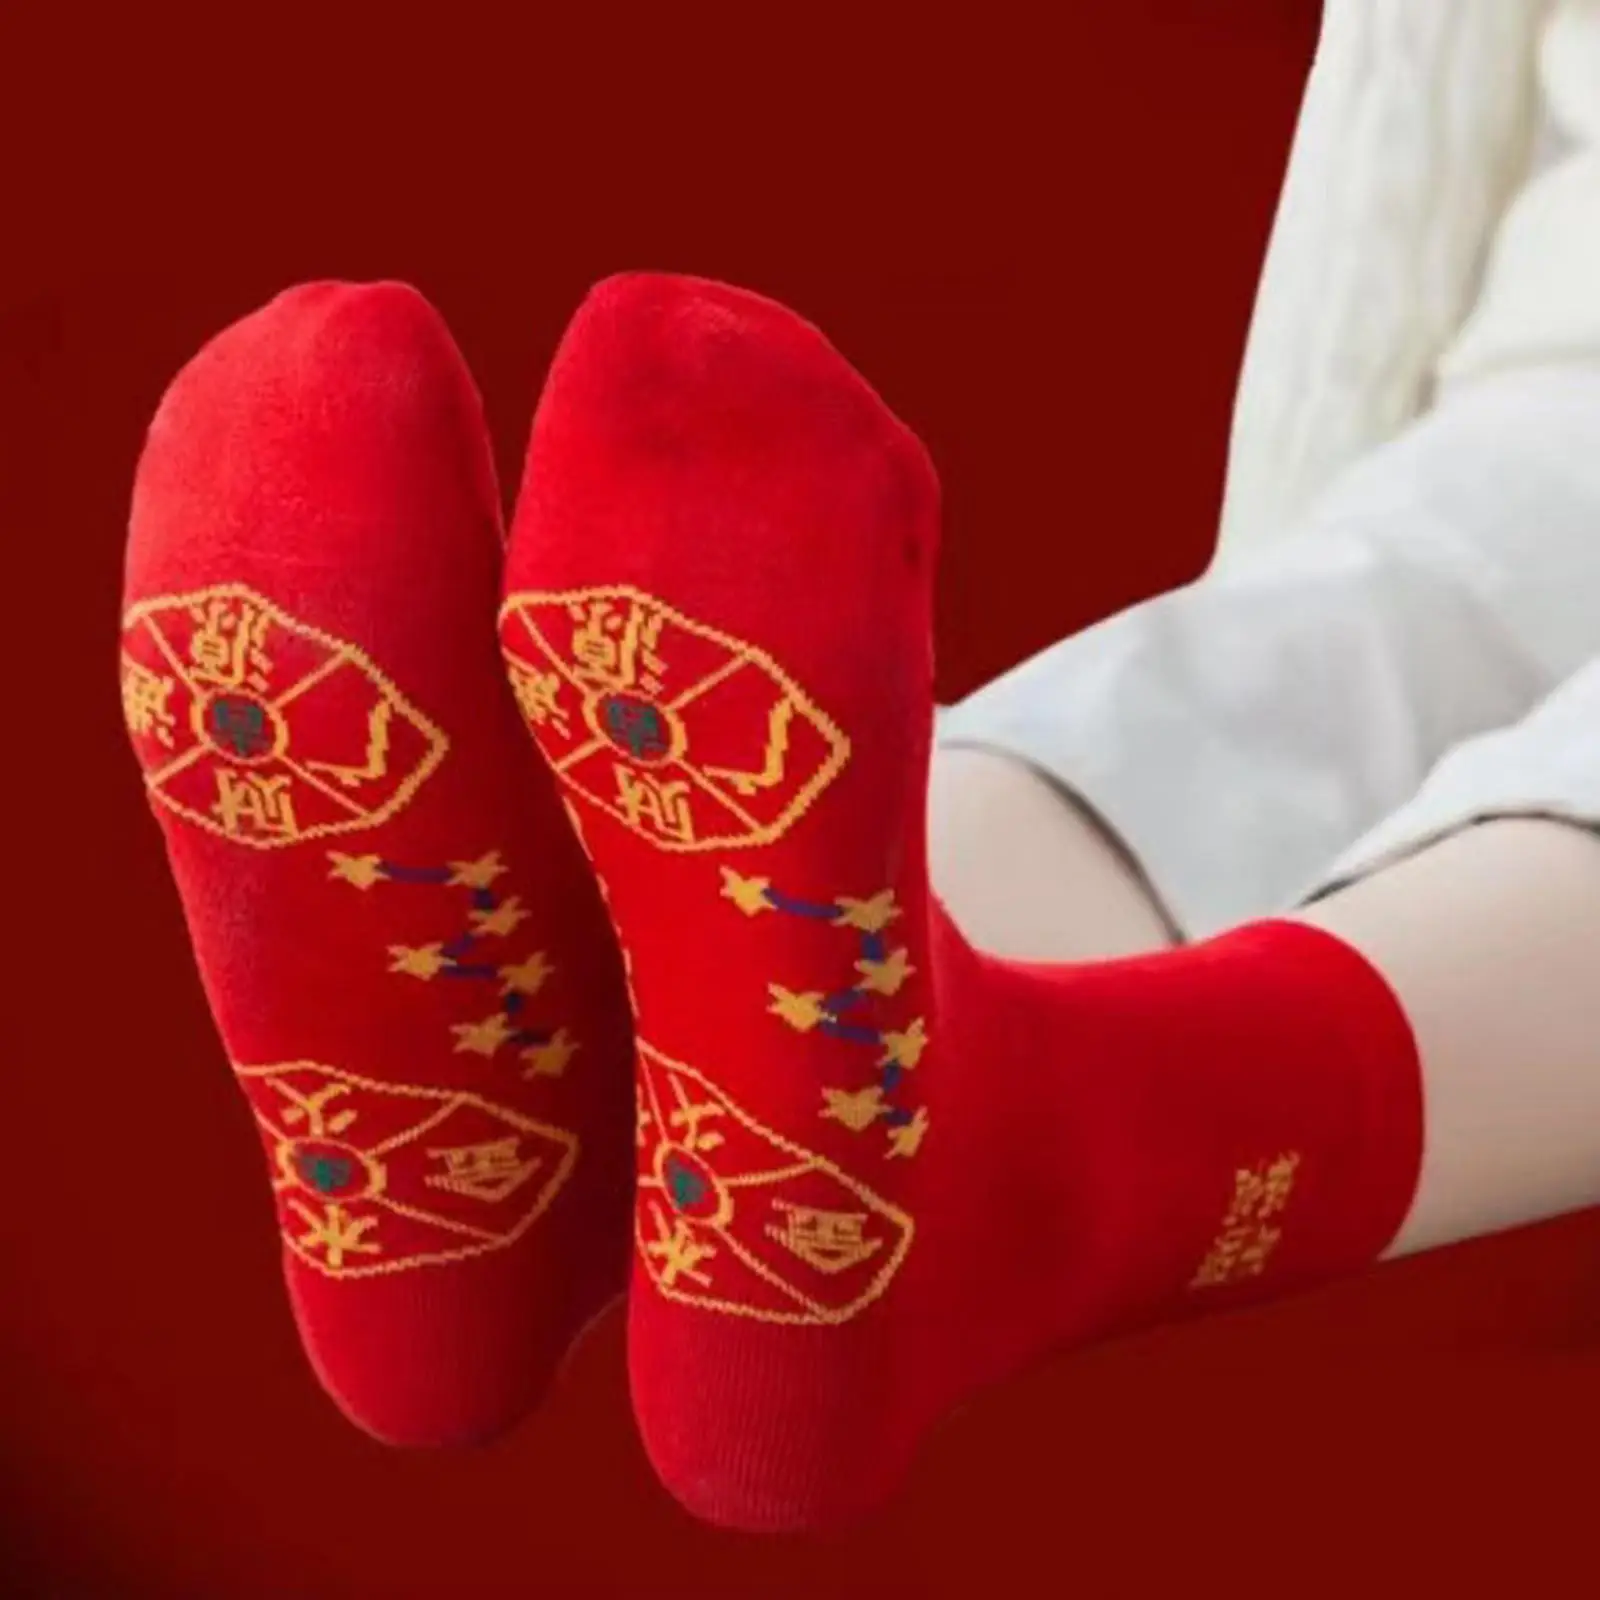 5 Pairs Chinese New Year Red Socks Soft Warm Winter Breathable Novelty Gifts Ankle Socks for Men Women Spring Festival Socks